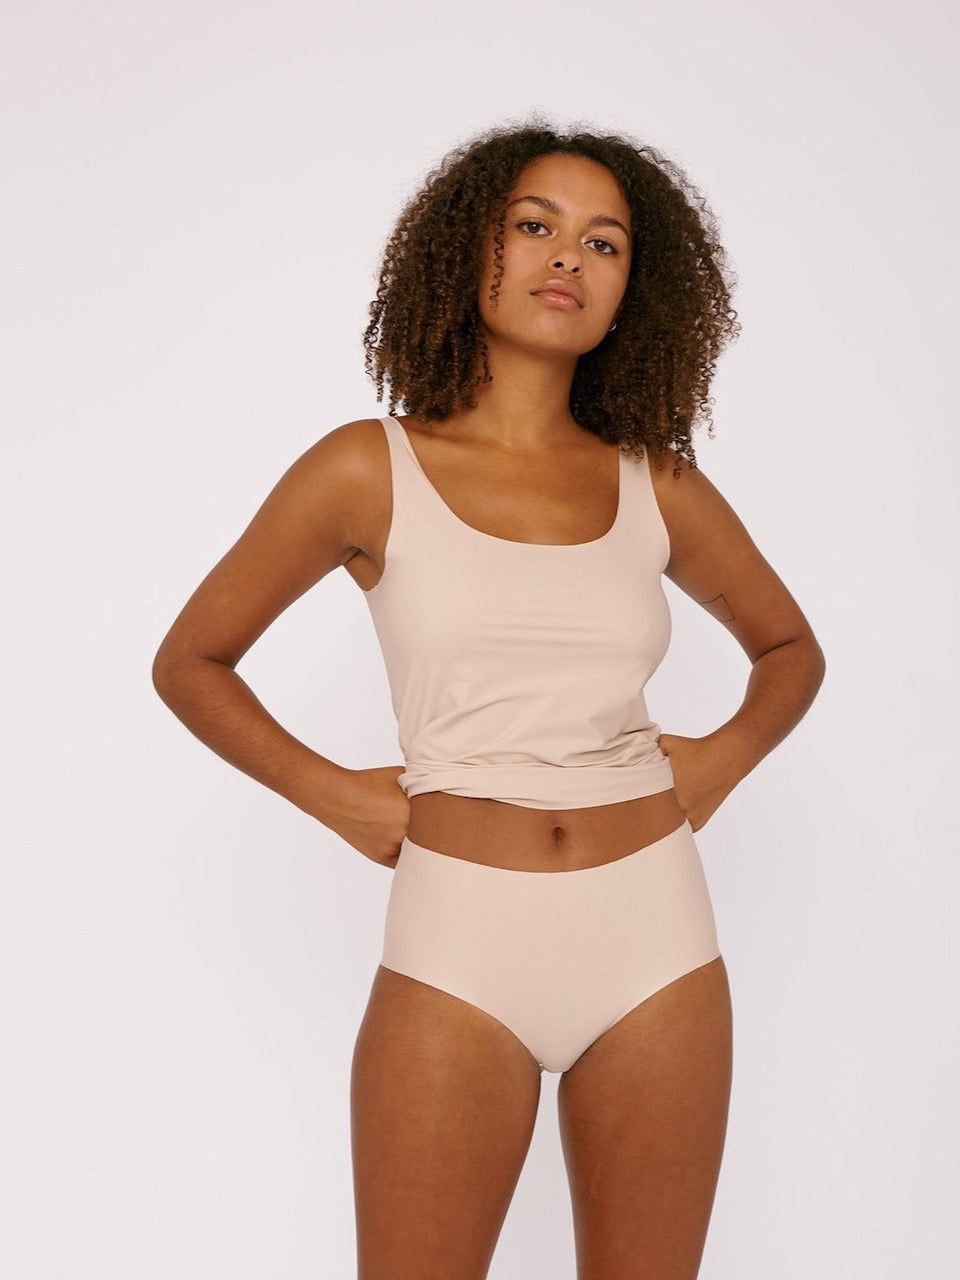 A woman in Organic Basics&#39; Invisible Cheeky High-Rise Briefs (2-pack) - Rose Nude tank top and panties.